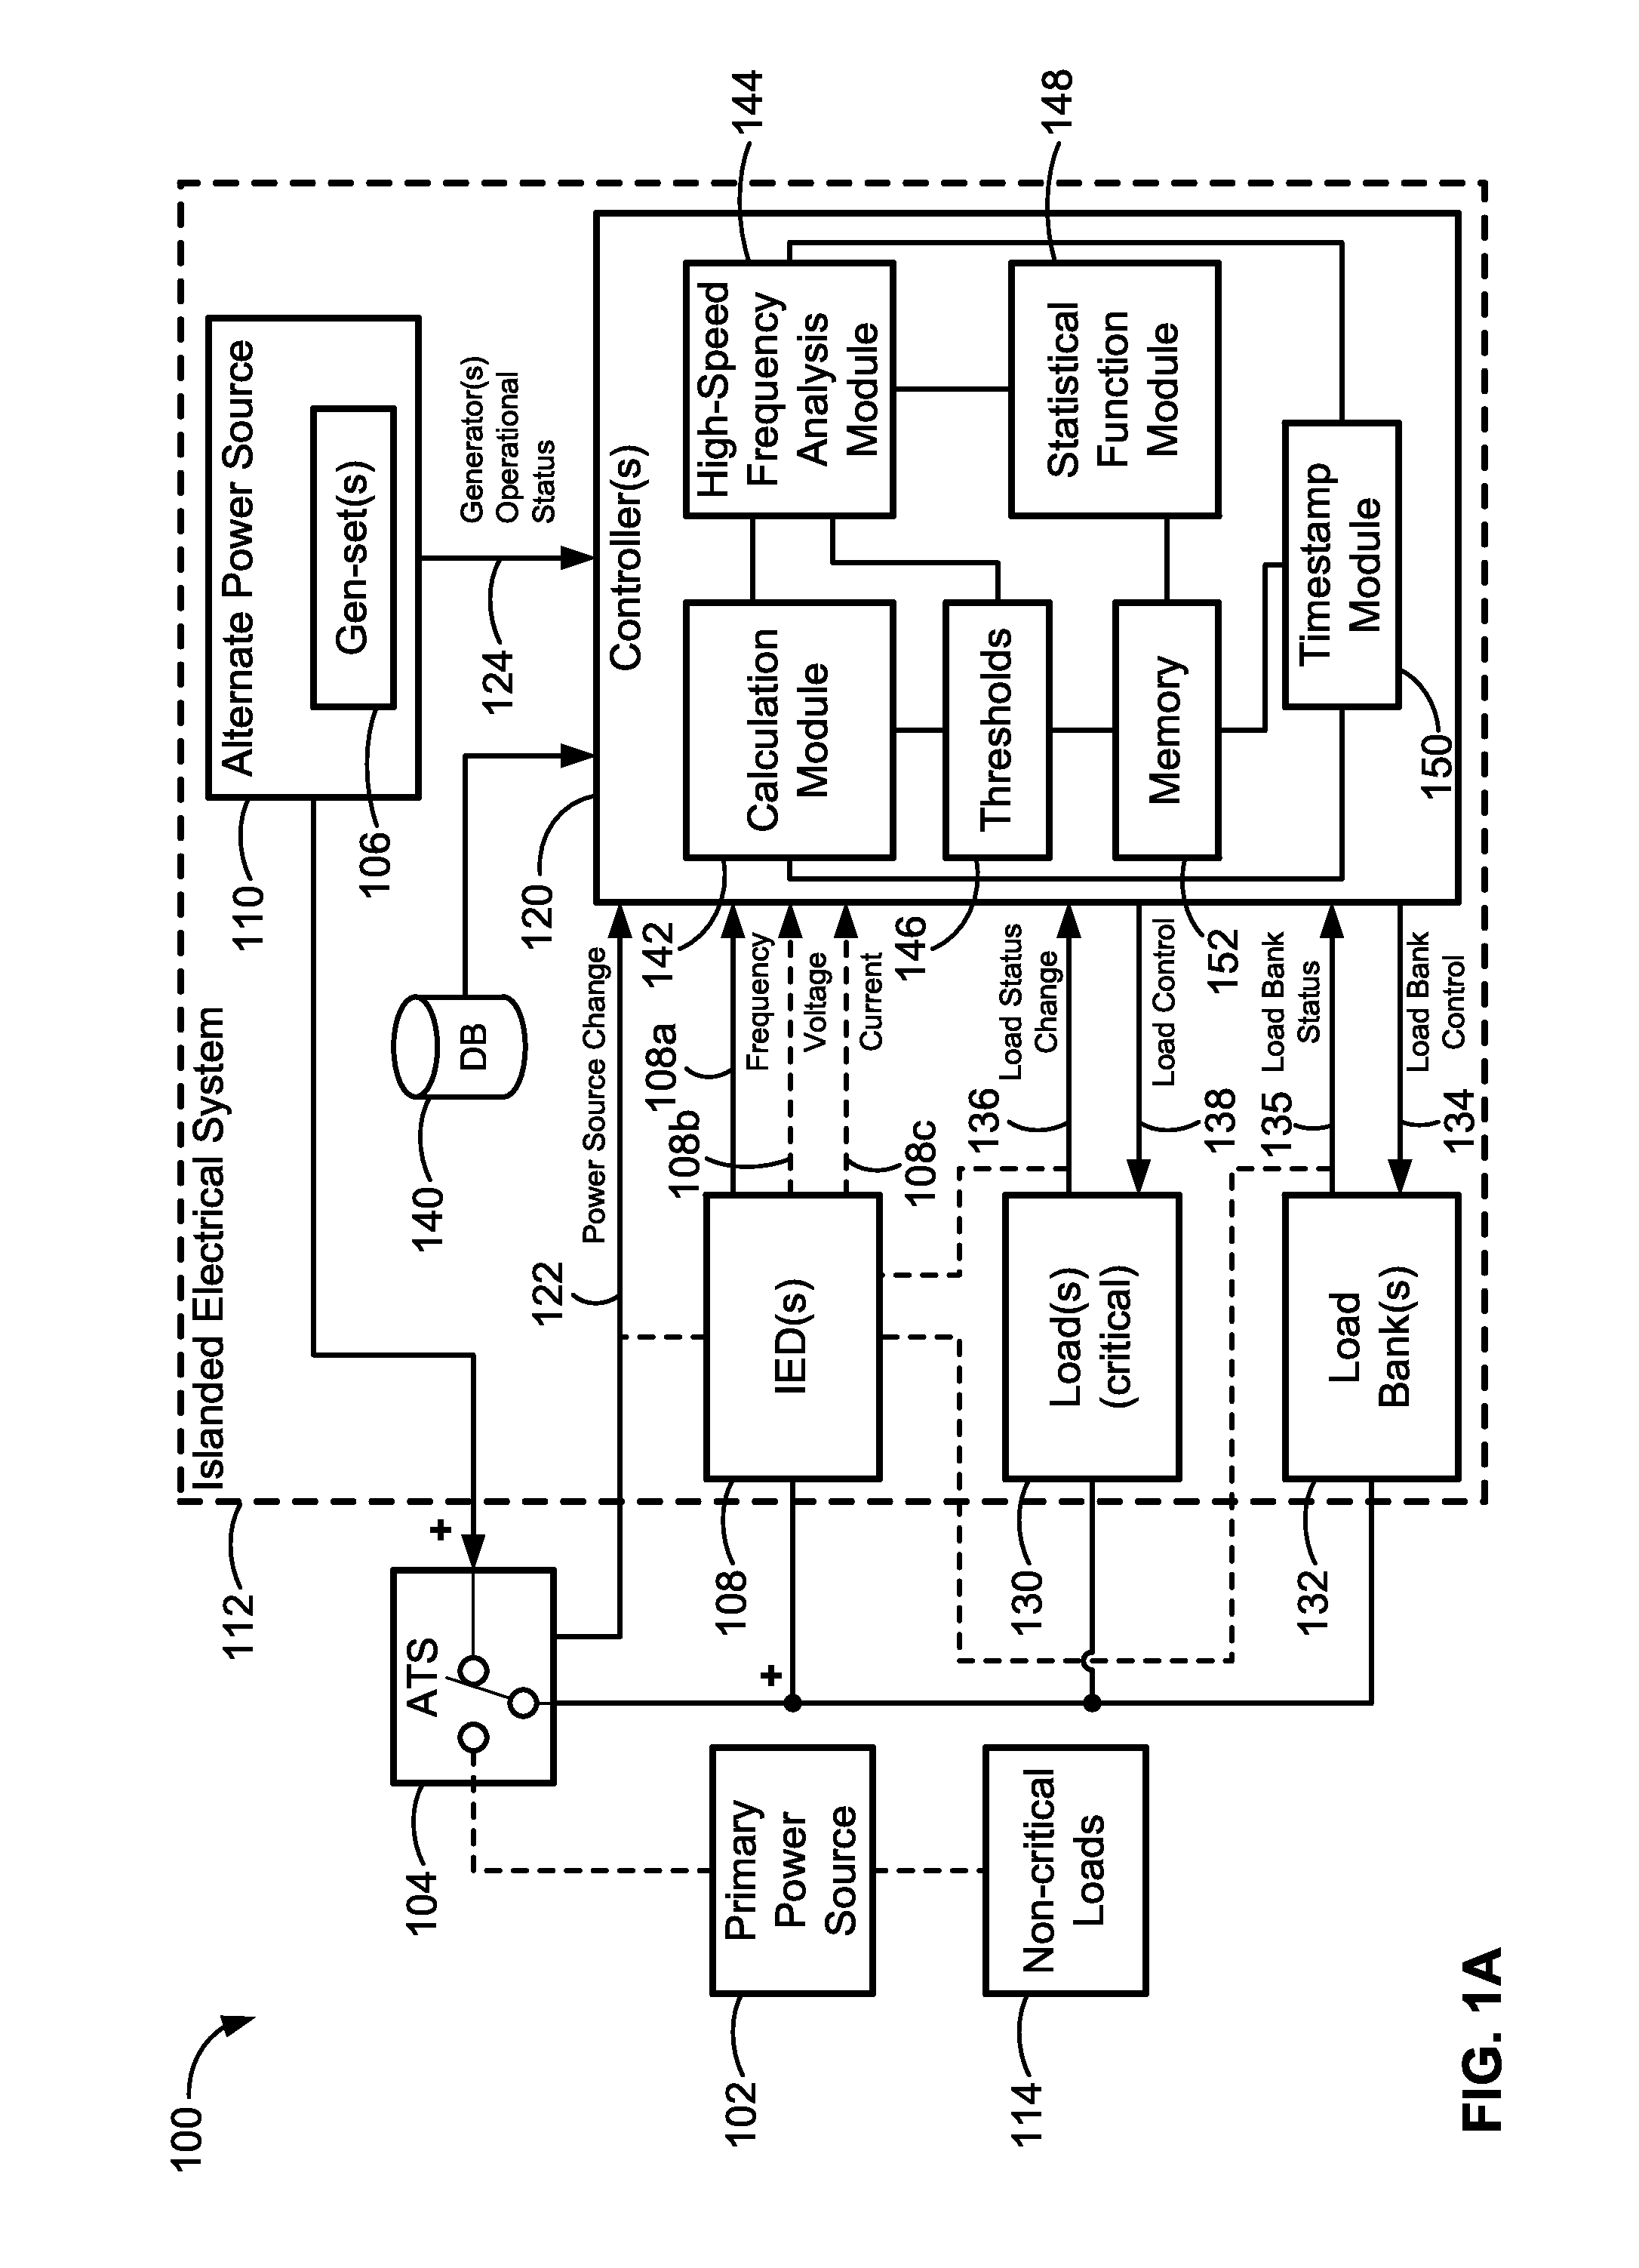 Method of detecting instability in islanded electrical systems